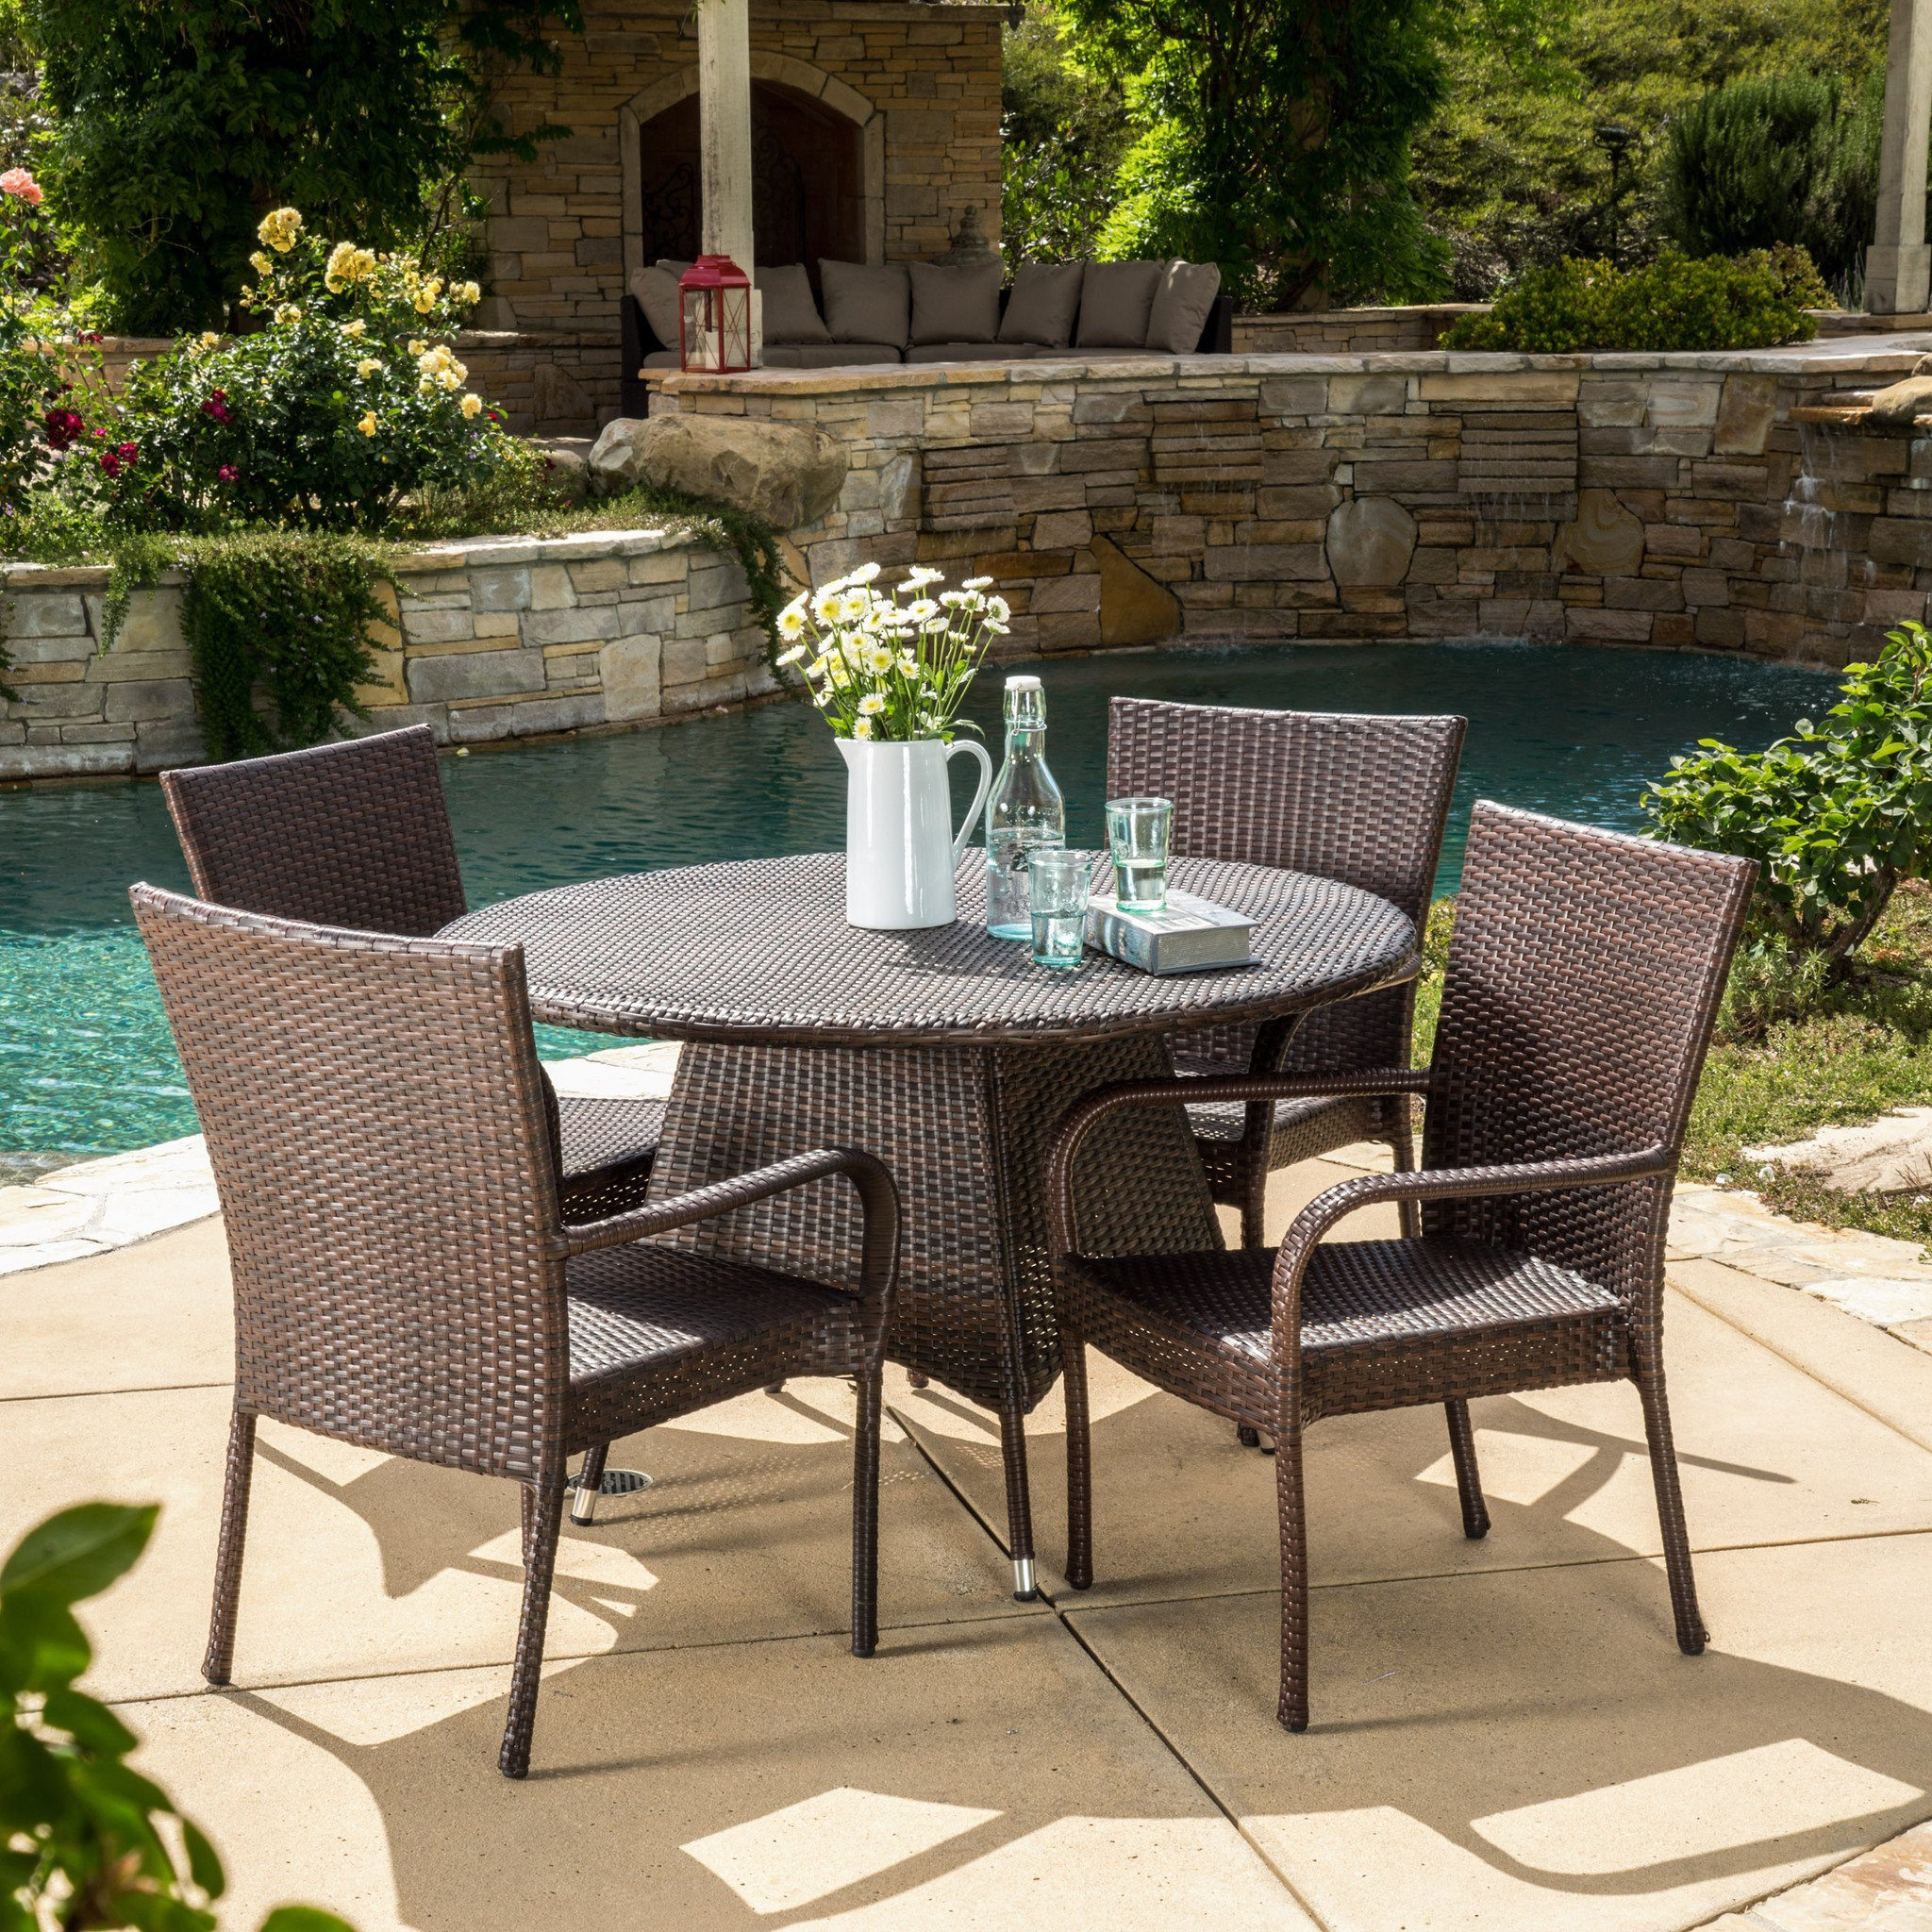 Kory Outdoor 5pc Multibrown Wicker Dining Set